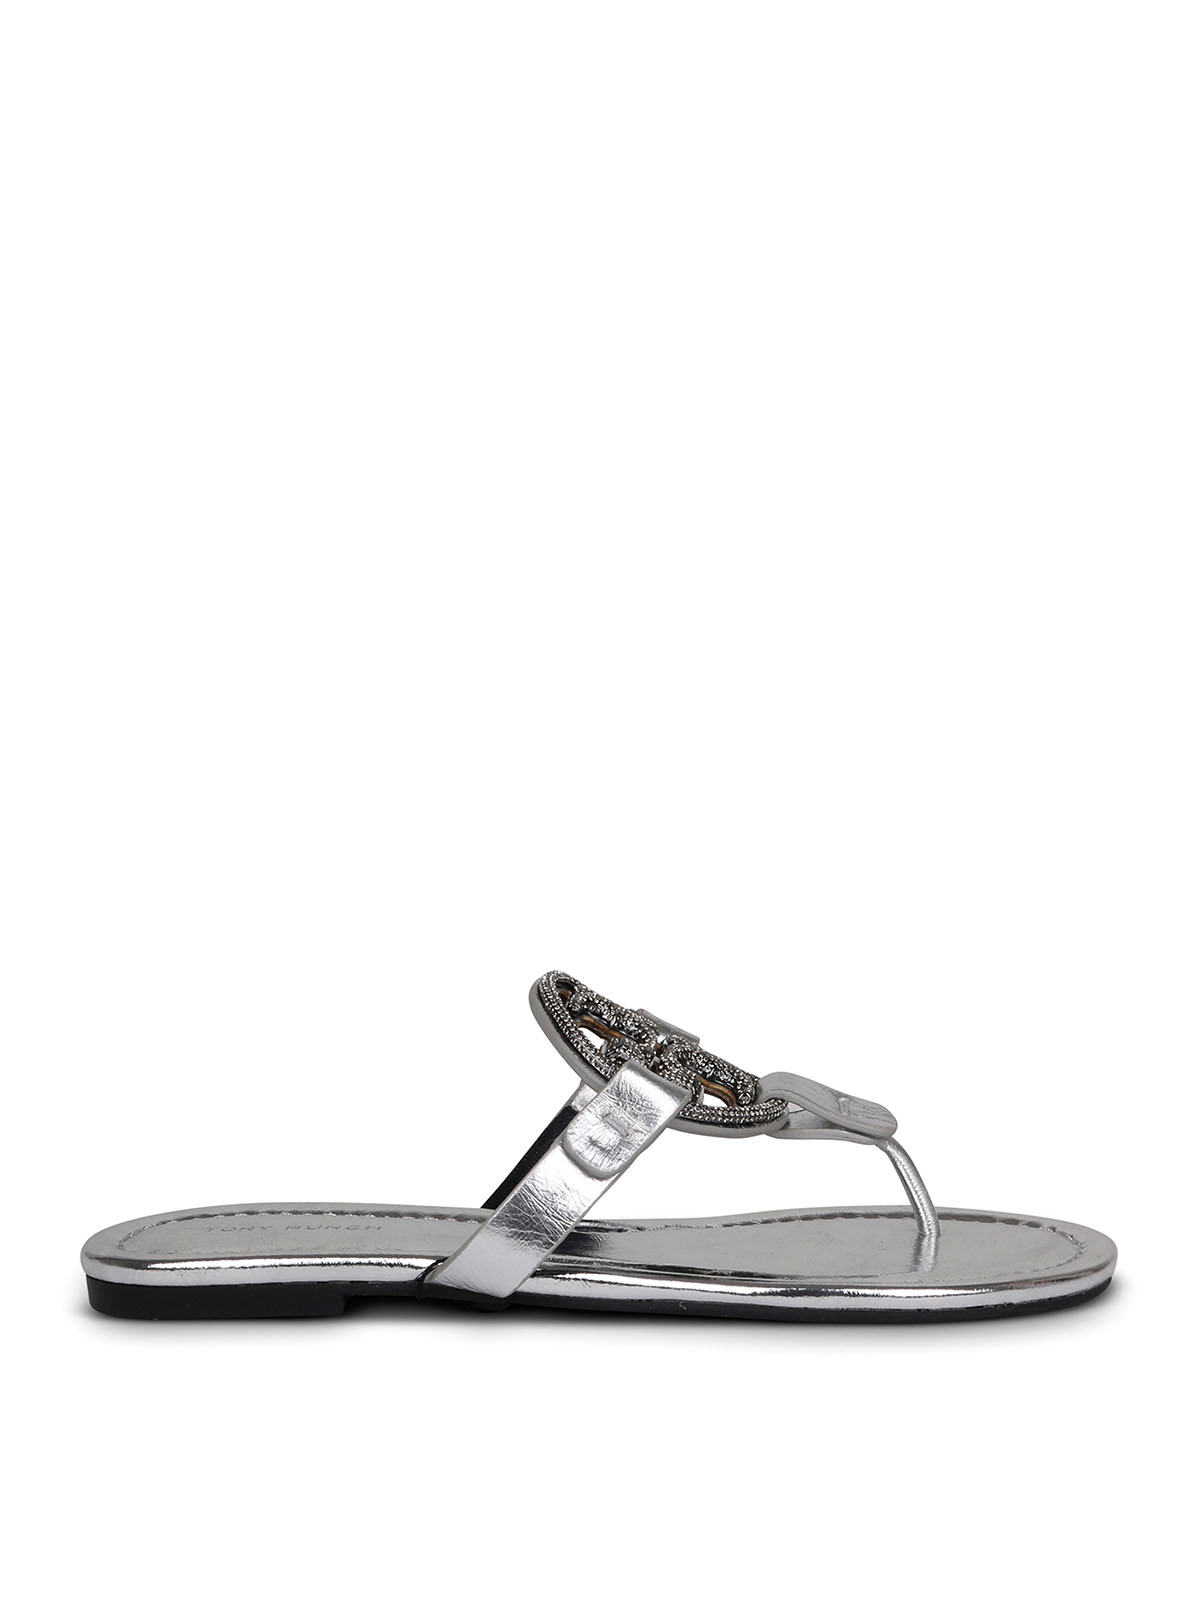 Sandals Tory Burch - Miller sandals with logo - 146017040 